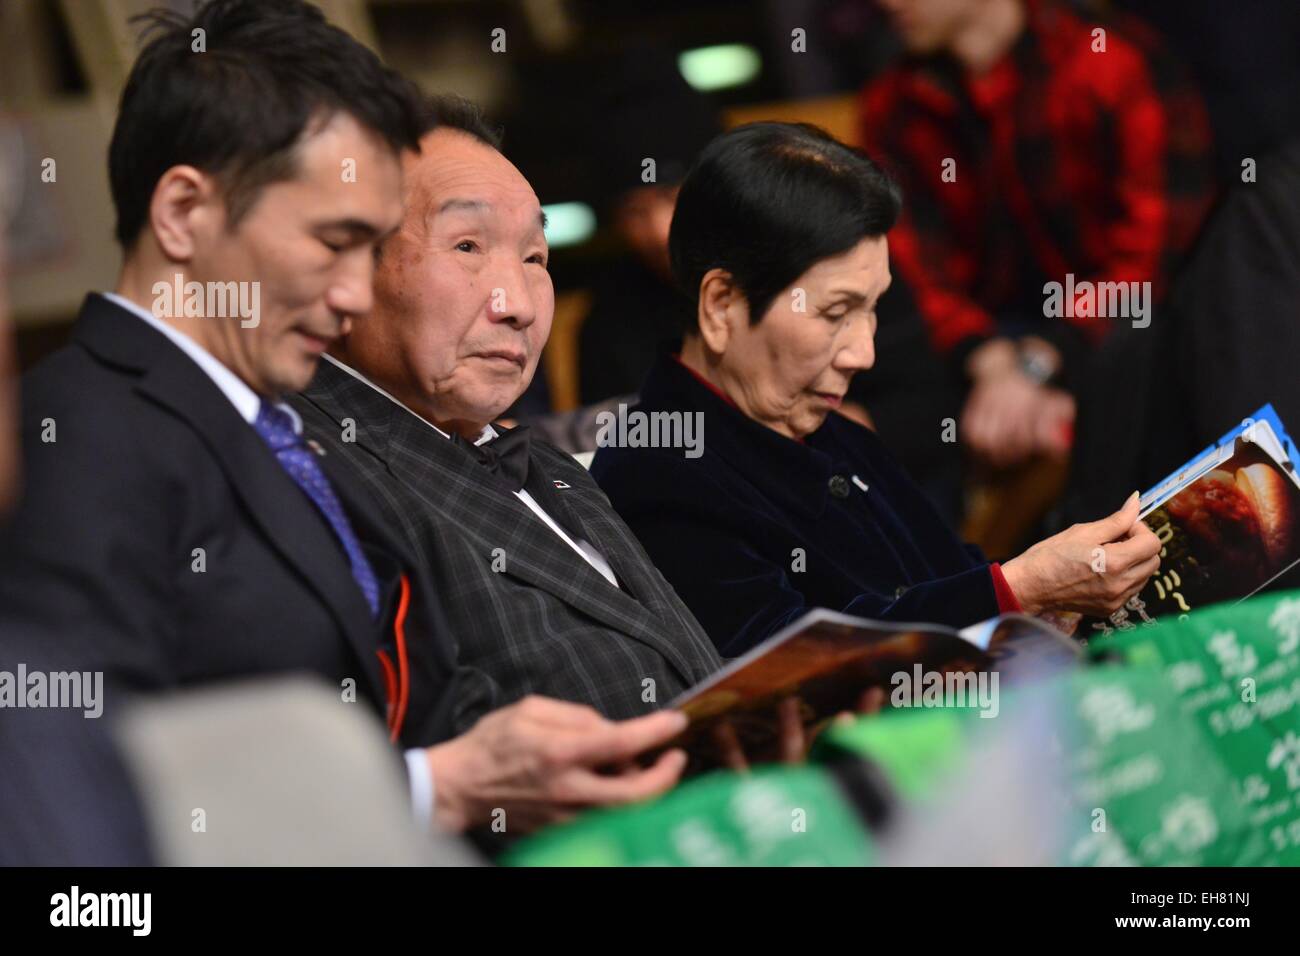 (C-R) Iwao Hakamada, Hideko Hakamada, MARCH 5, 2015 - Boxing : Iwao Hakamada attends the boxing event with his sister Hideko Hakamada at Korakuen Hall in Tokyo, Japan. Iwao Hakamada is a Japanese former professional boxer who was sentenced to death on September 11, 1968 and ended up spending 45 years on death row. In 2011 the Guinness World Records certified Hakamada as the world's longest-held death row inmate. In March 2014, he was granted a retrial and an immediate release when the Shizuoka district court found there was reason to believe evidence against him had been falsified. (Photo by H Stock Photo